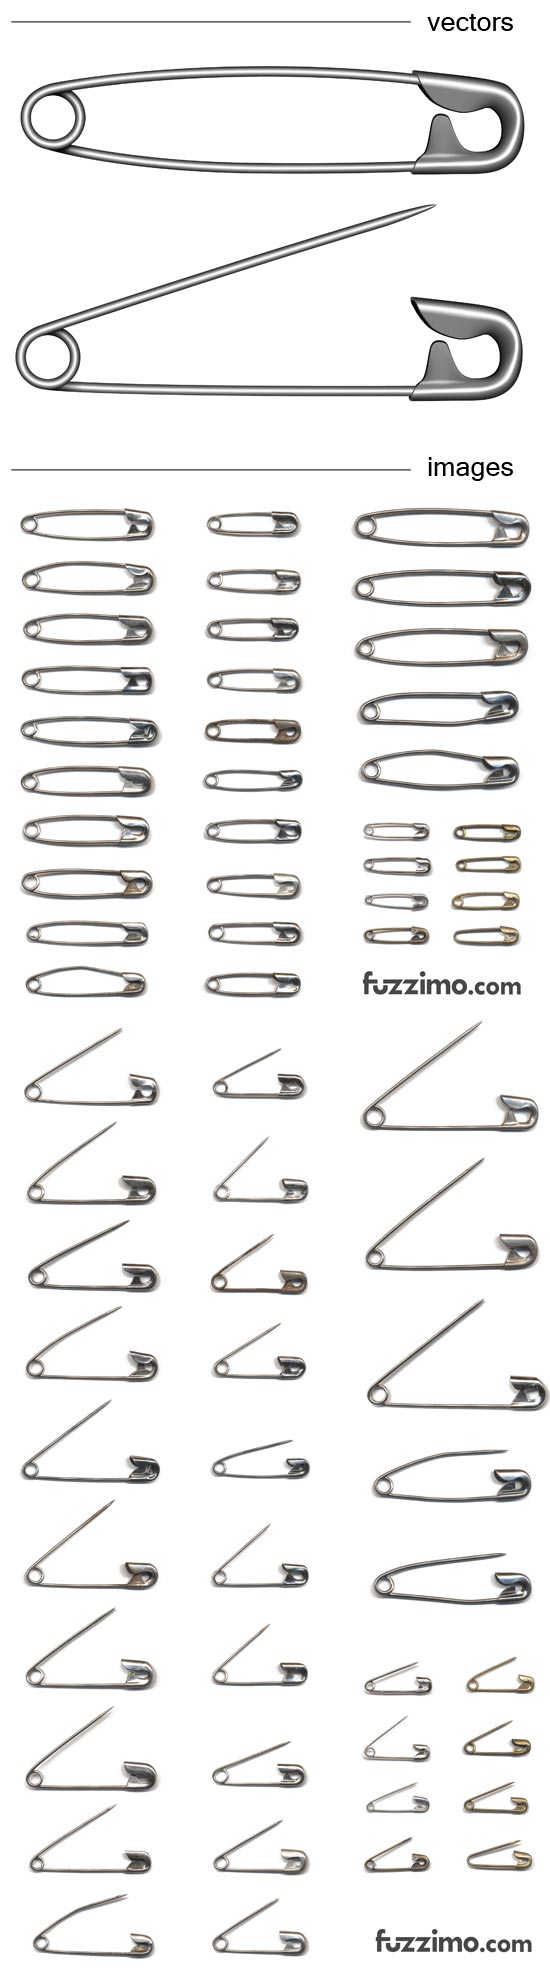 fzm-Vector-Safety-Pins-and Images-02